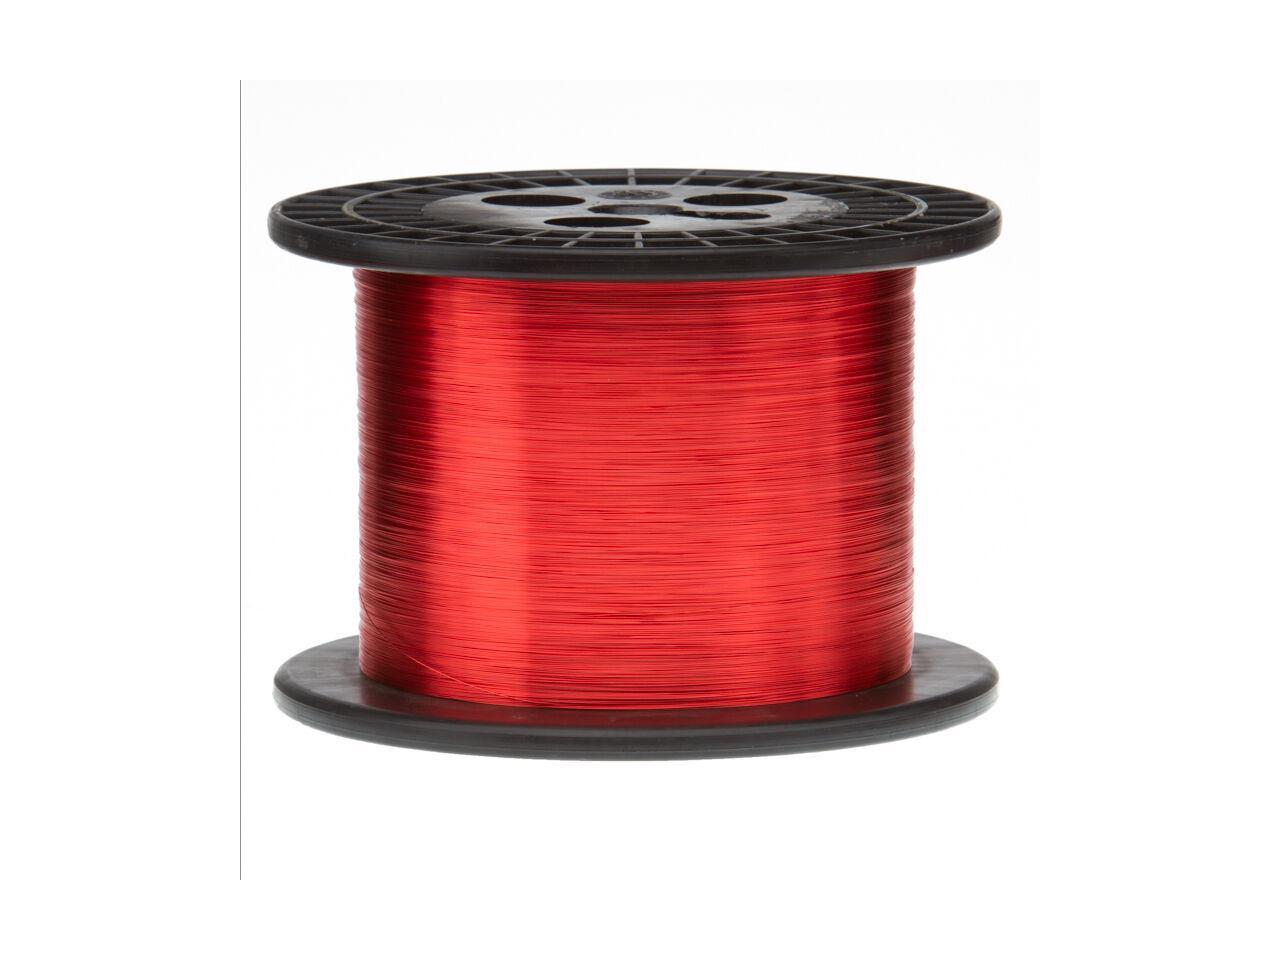 43 AWG Gauge Enameled Copper Magnet Wire 5.0 lbs 0.0024" 155C Red MW-79-C 